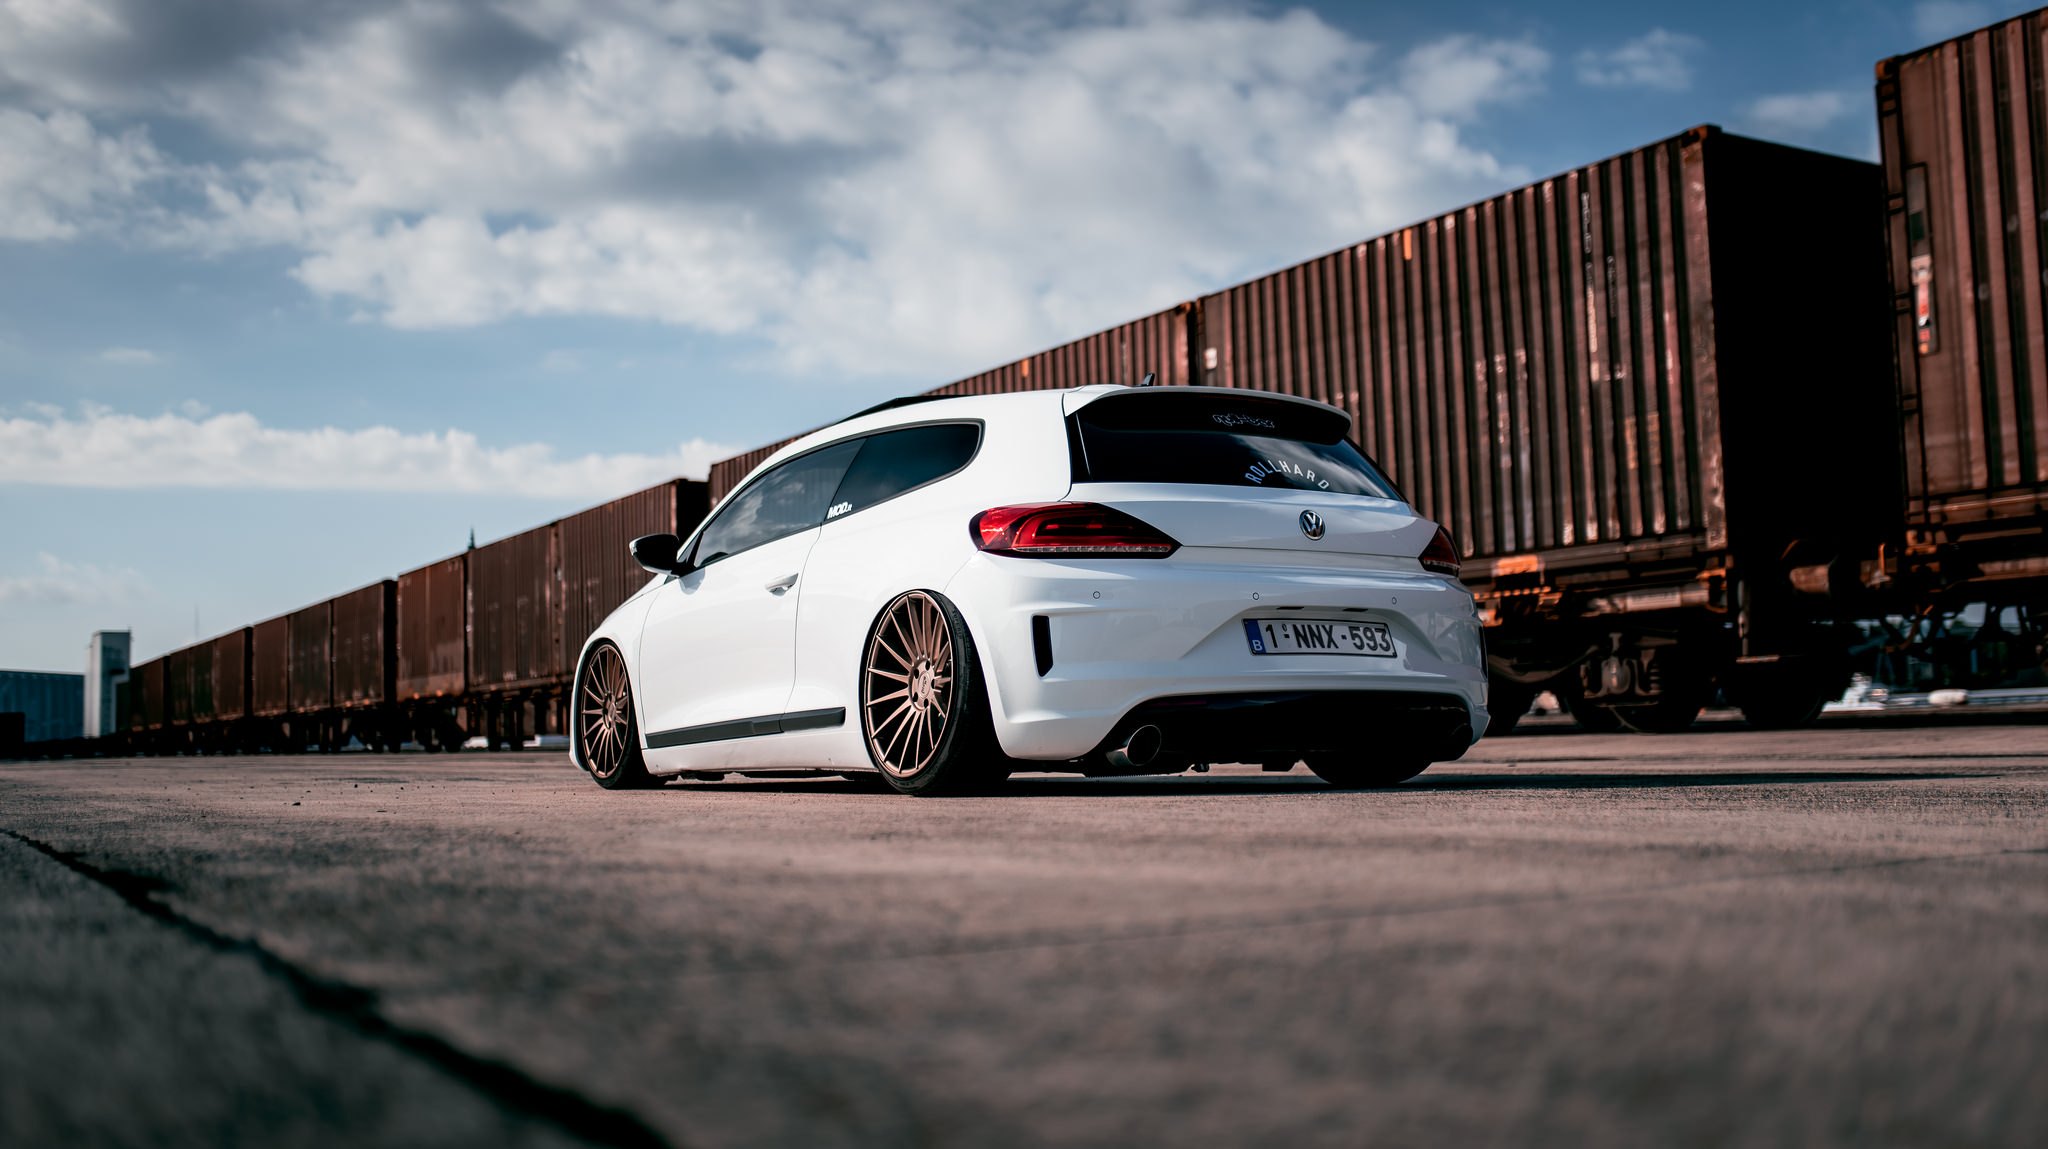 Roofline Spoiler on White VW Scirocco - Photo by Niche Road Wheels